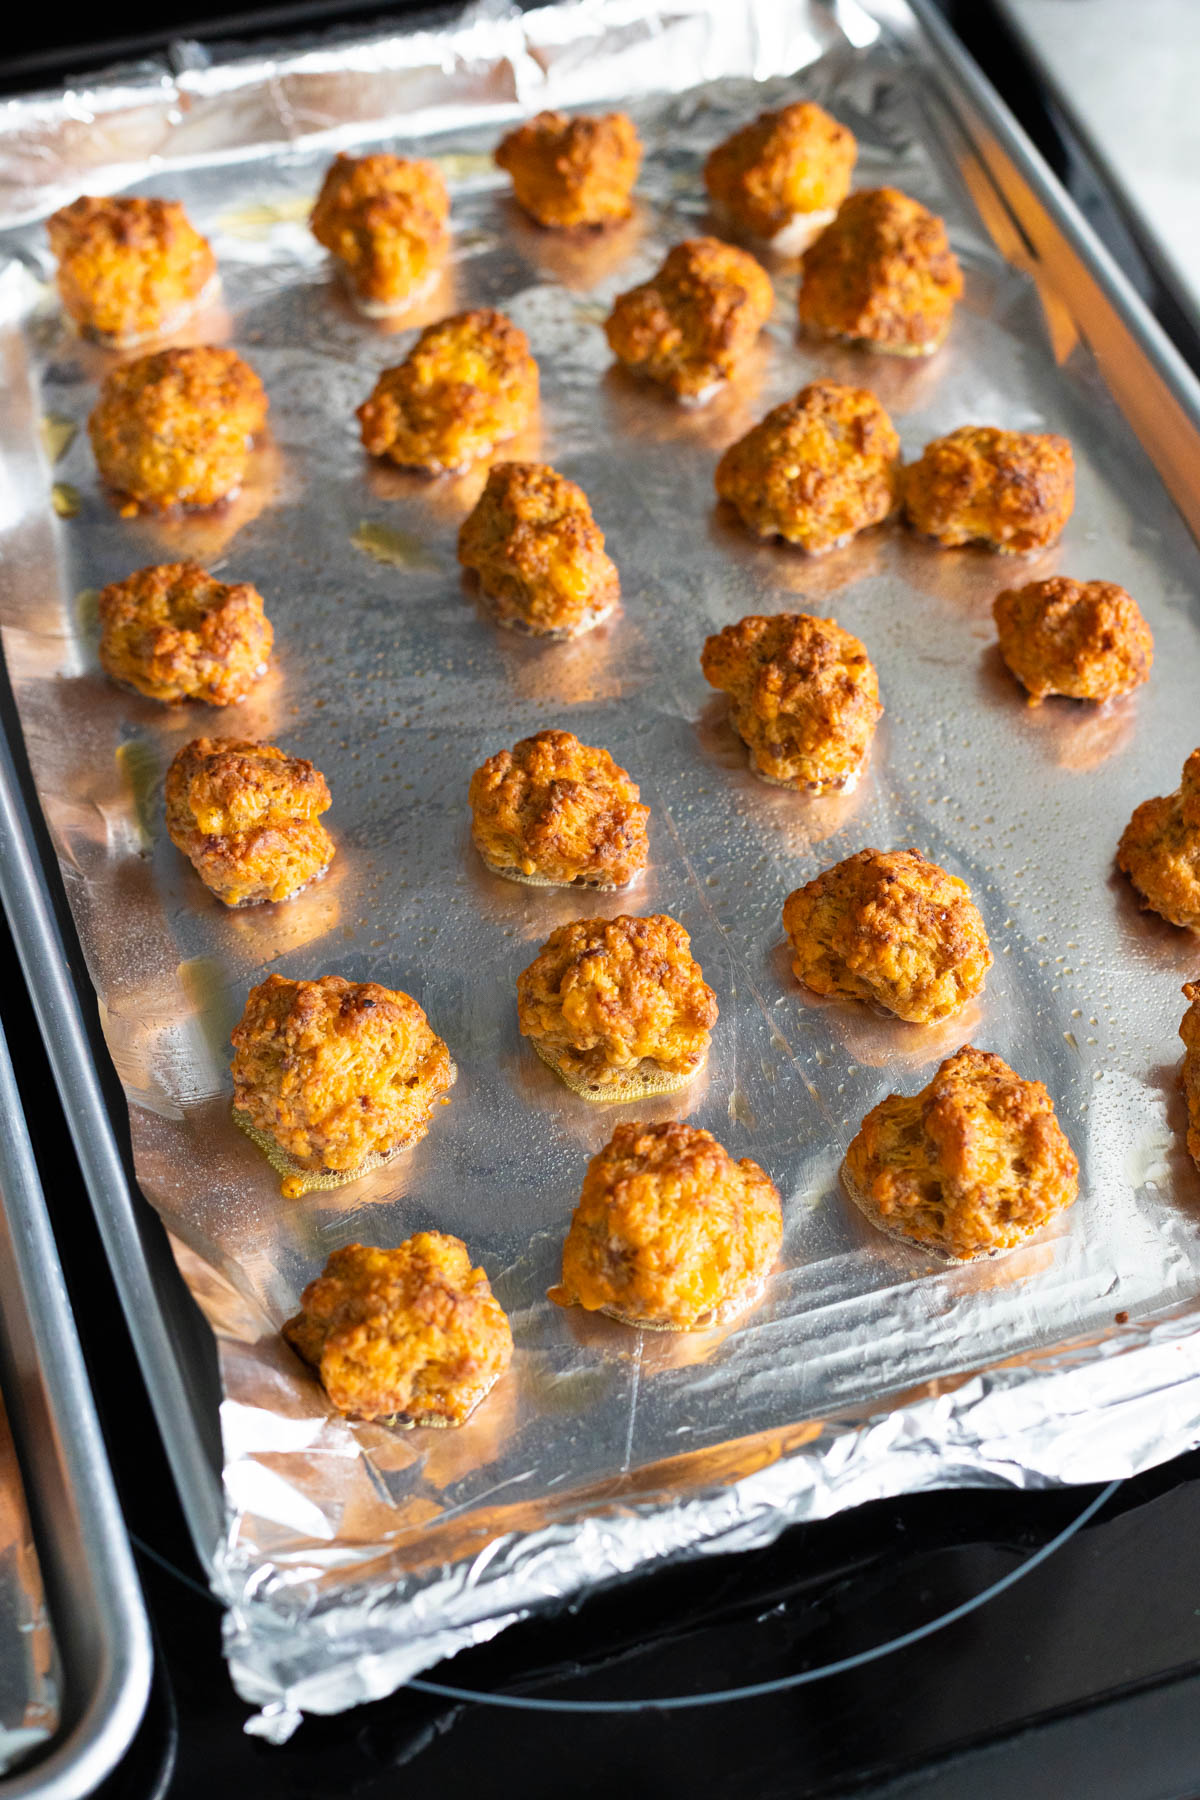 The sausage balls are fresh from the oven and are golden brown.